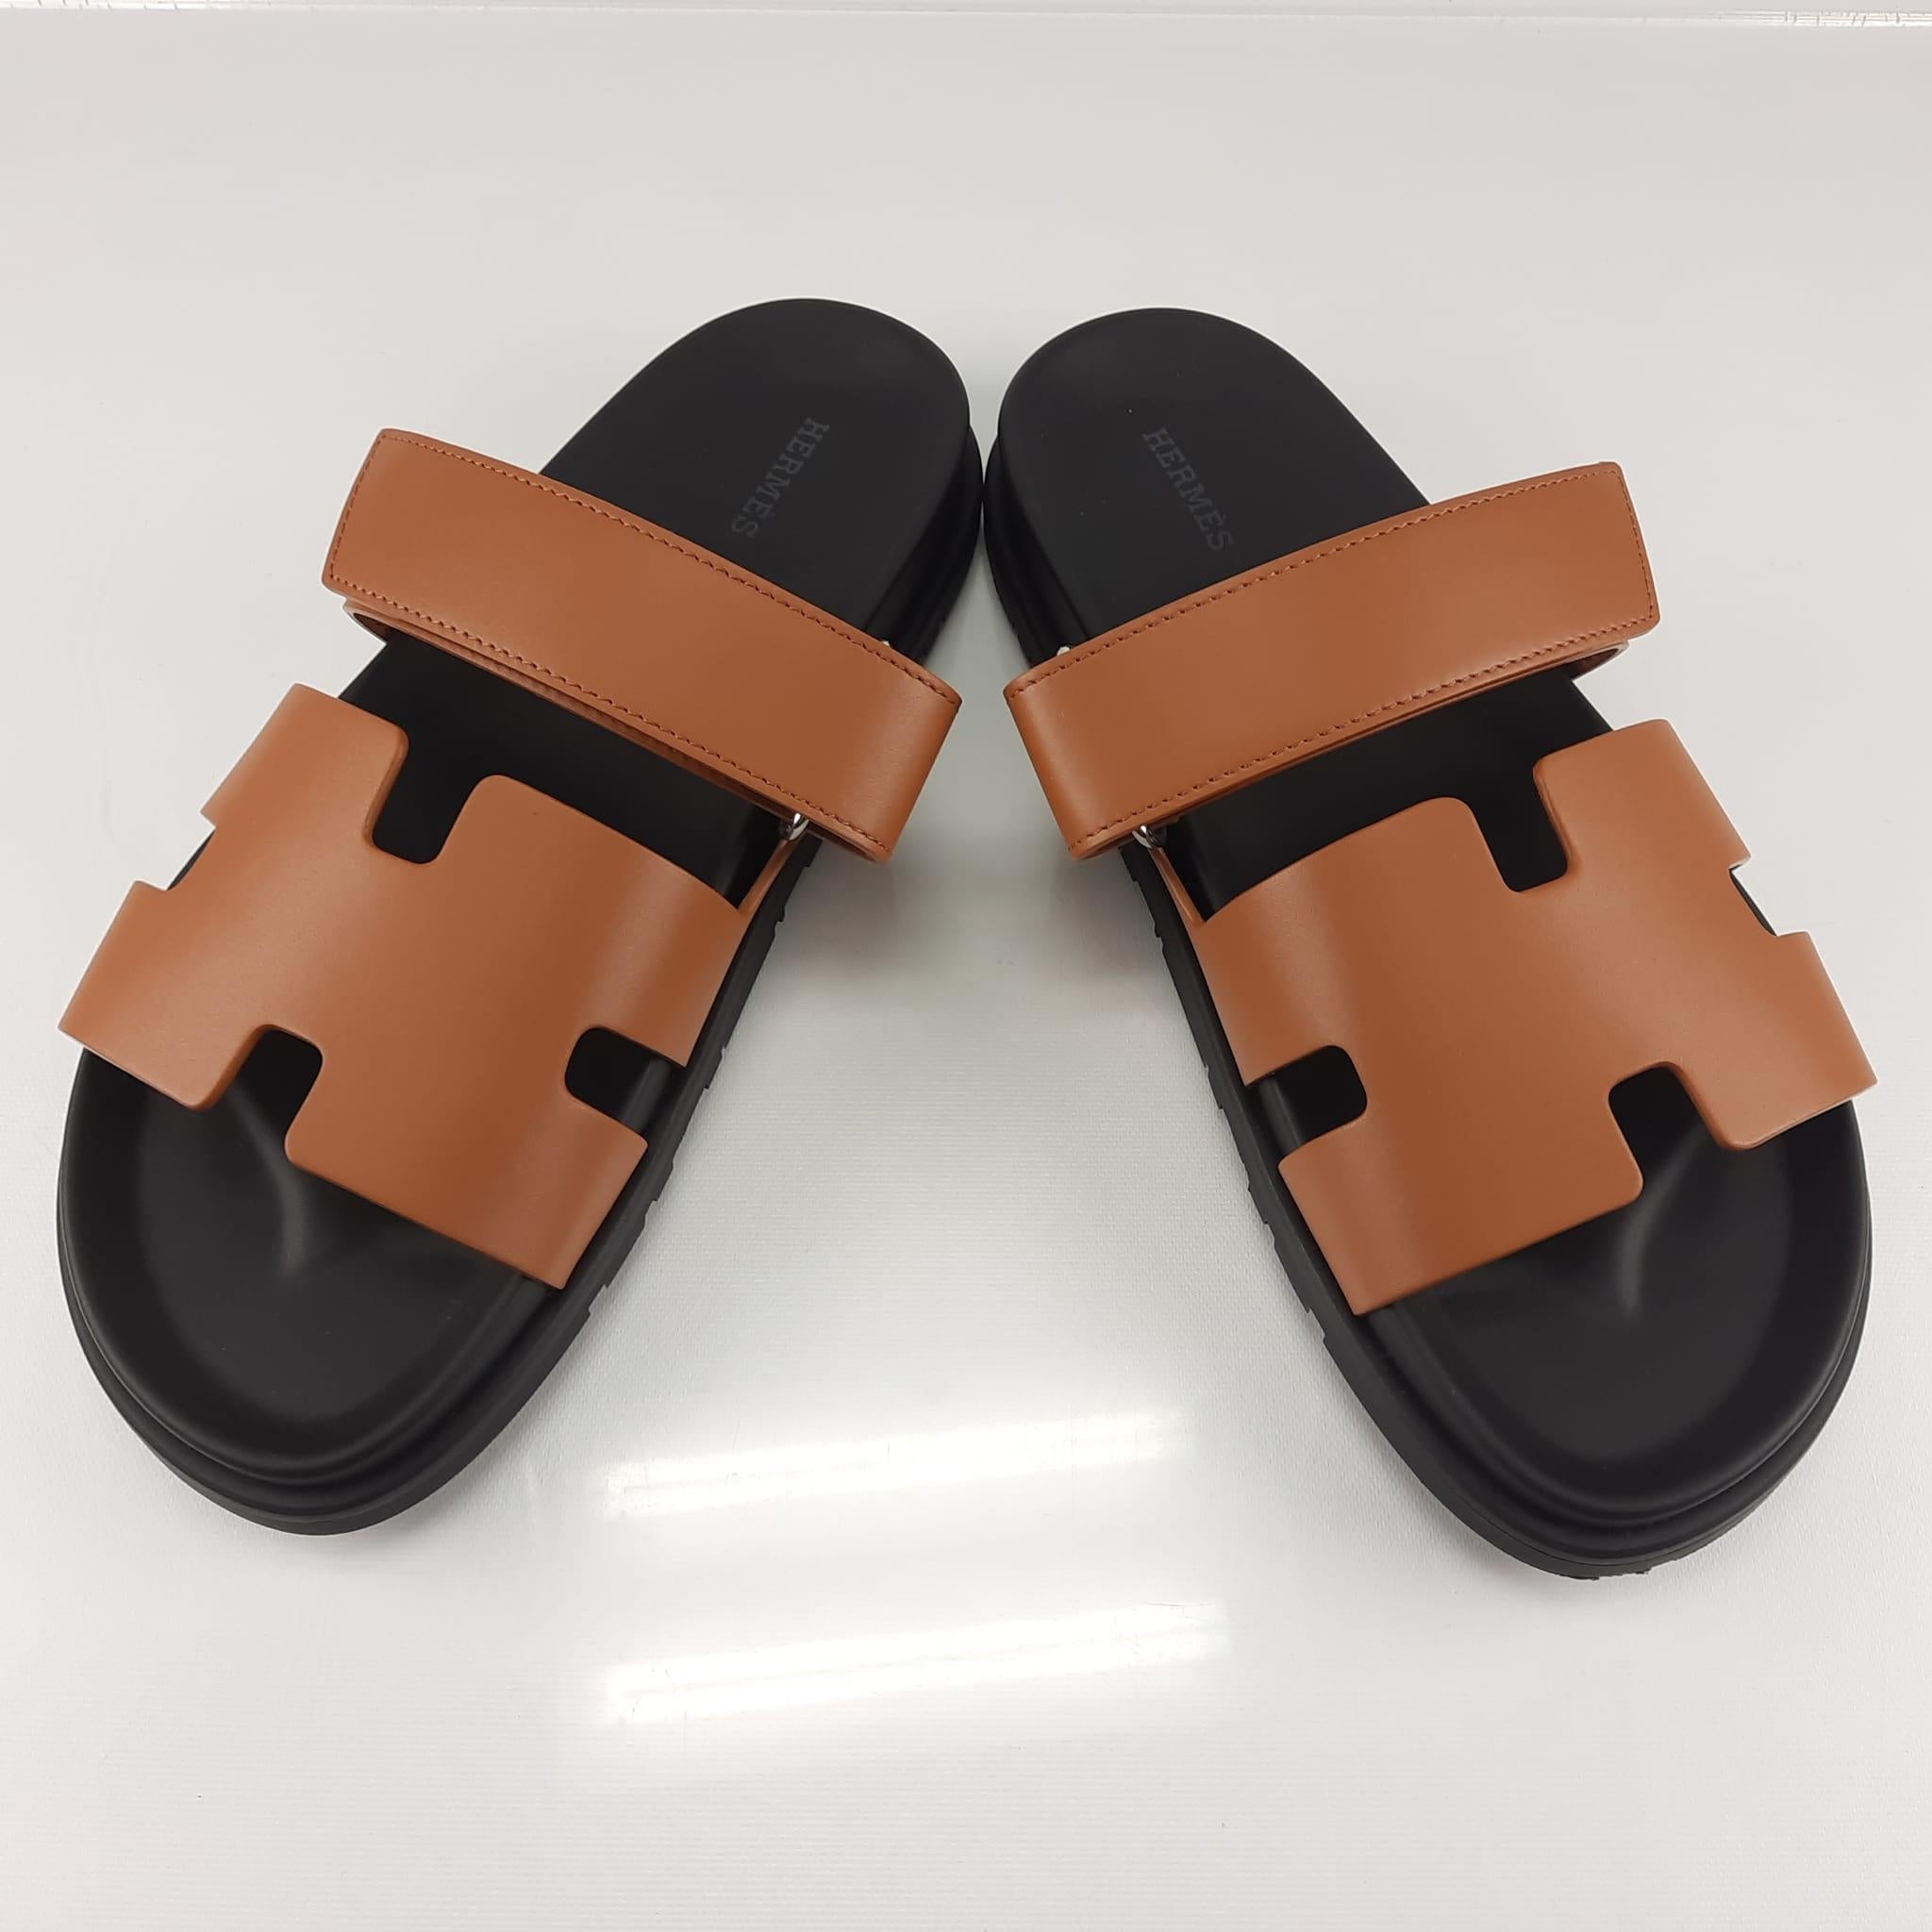 Size 41
Techno-sandal in calfskin with anatomical rubber sole and adjustable strap.
A sleek design for a comfortable casual look.
Made in Italy